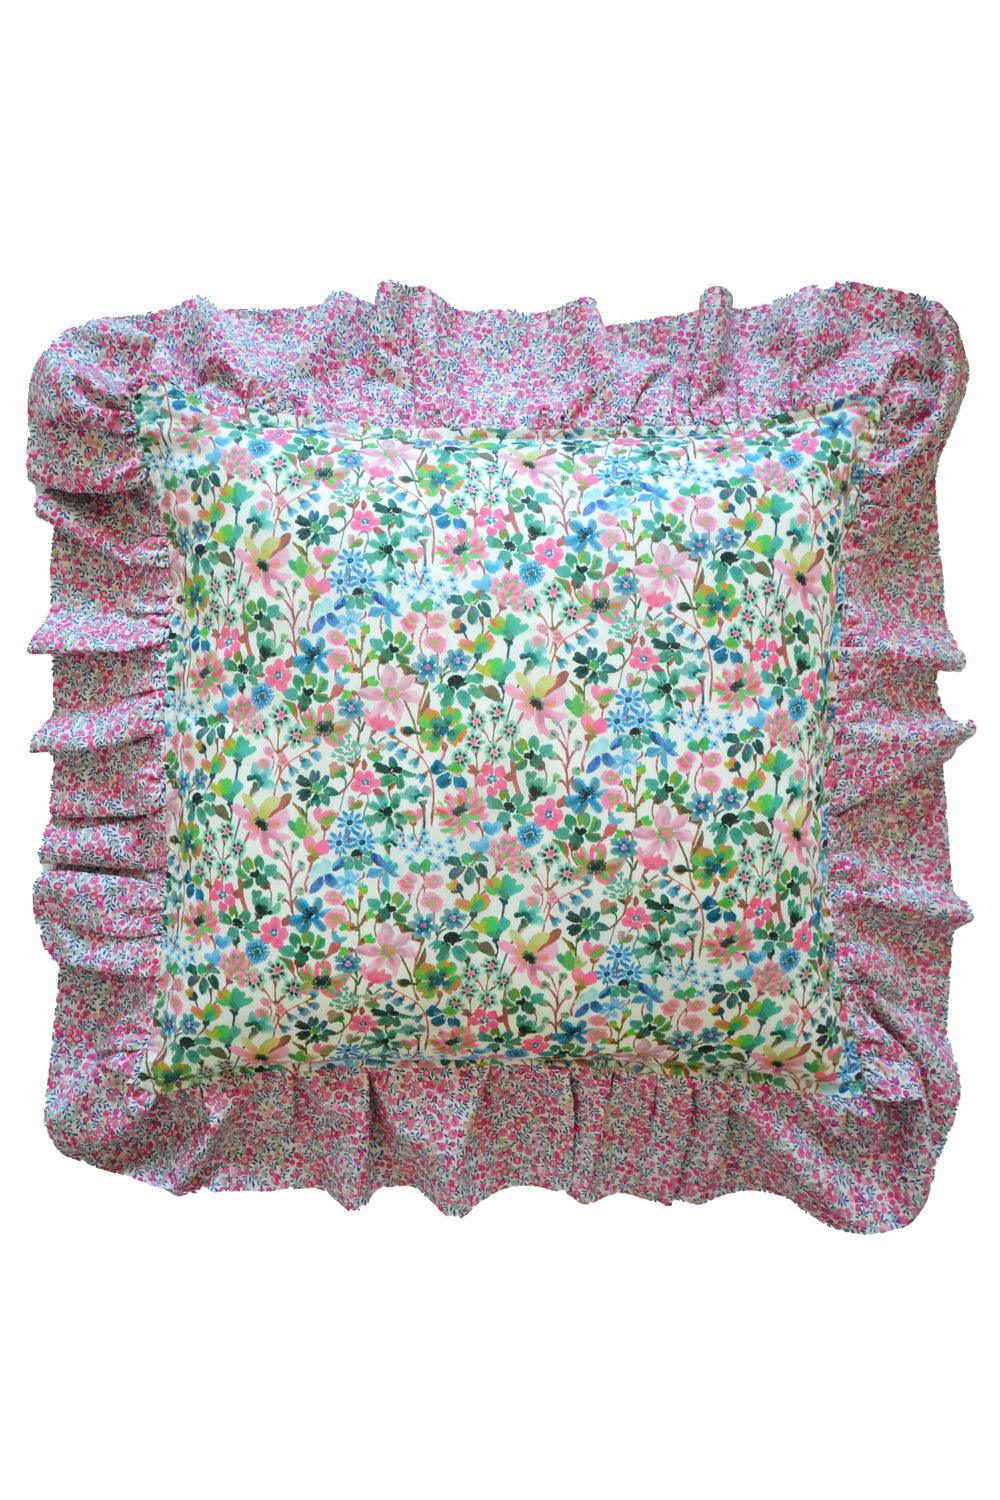 Ruffle Cushion made with Liberty Fabric DREAMS OF SUMMER - Coco & Wolf